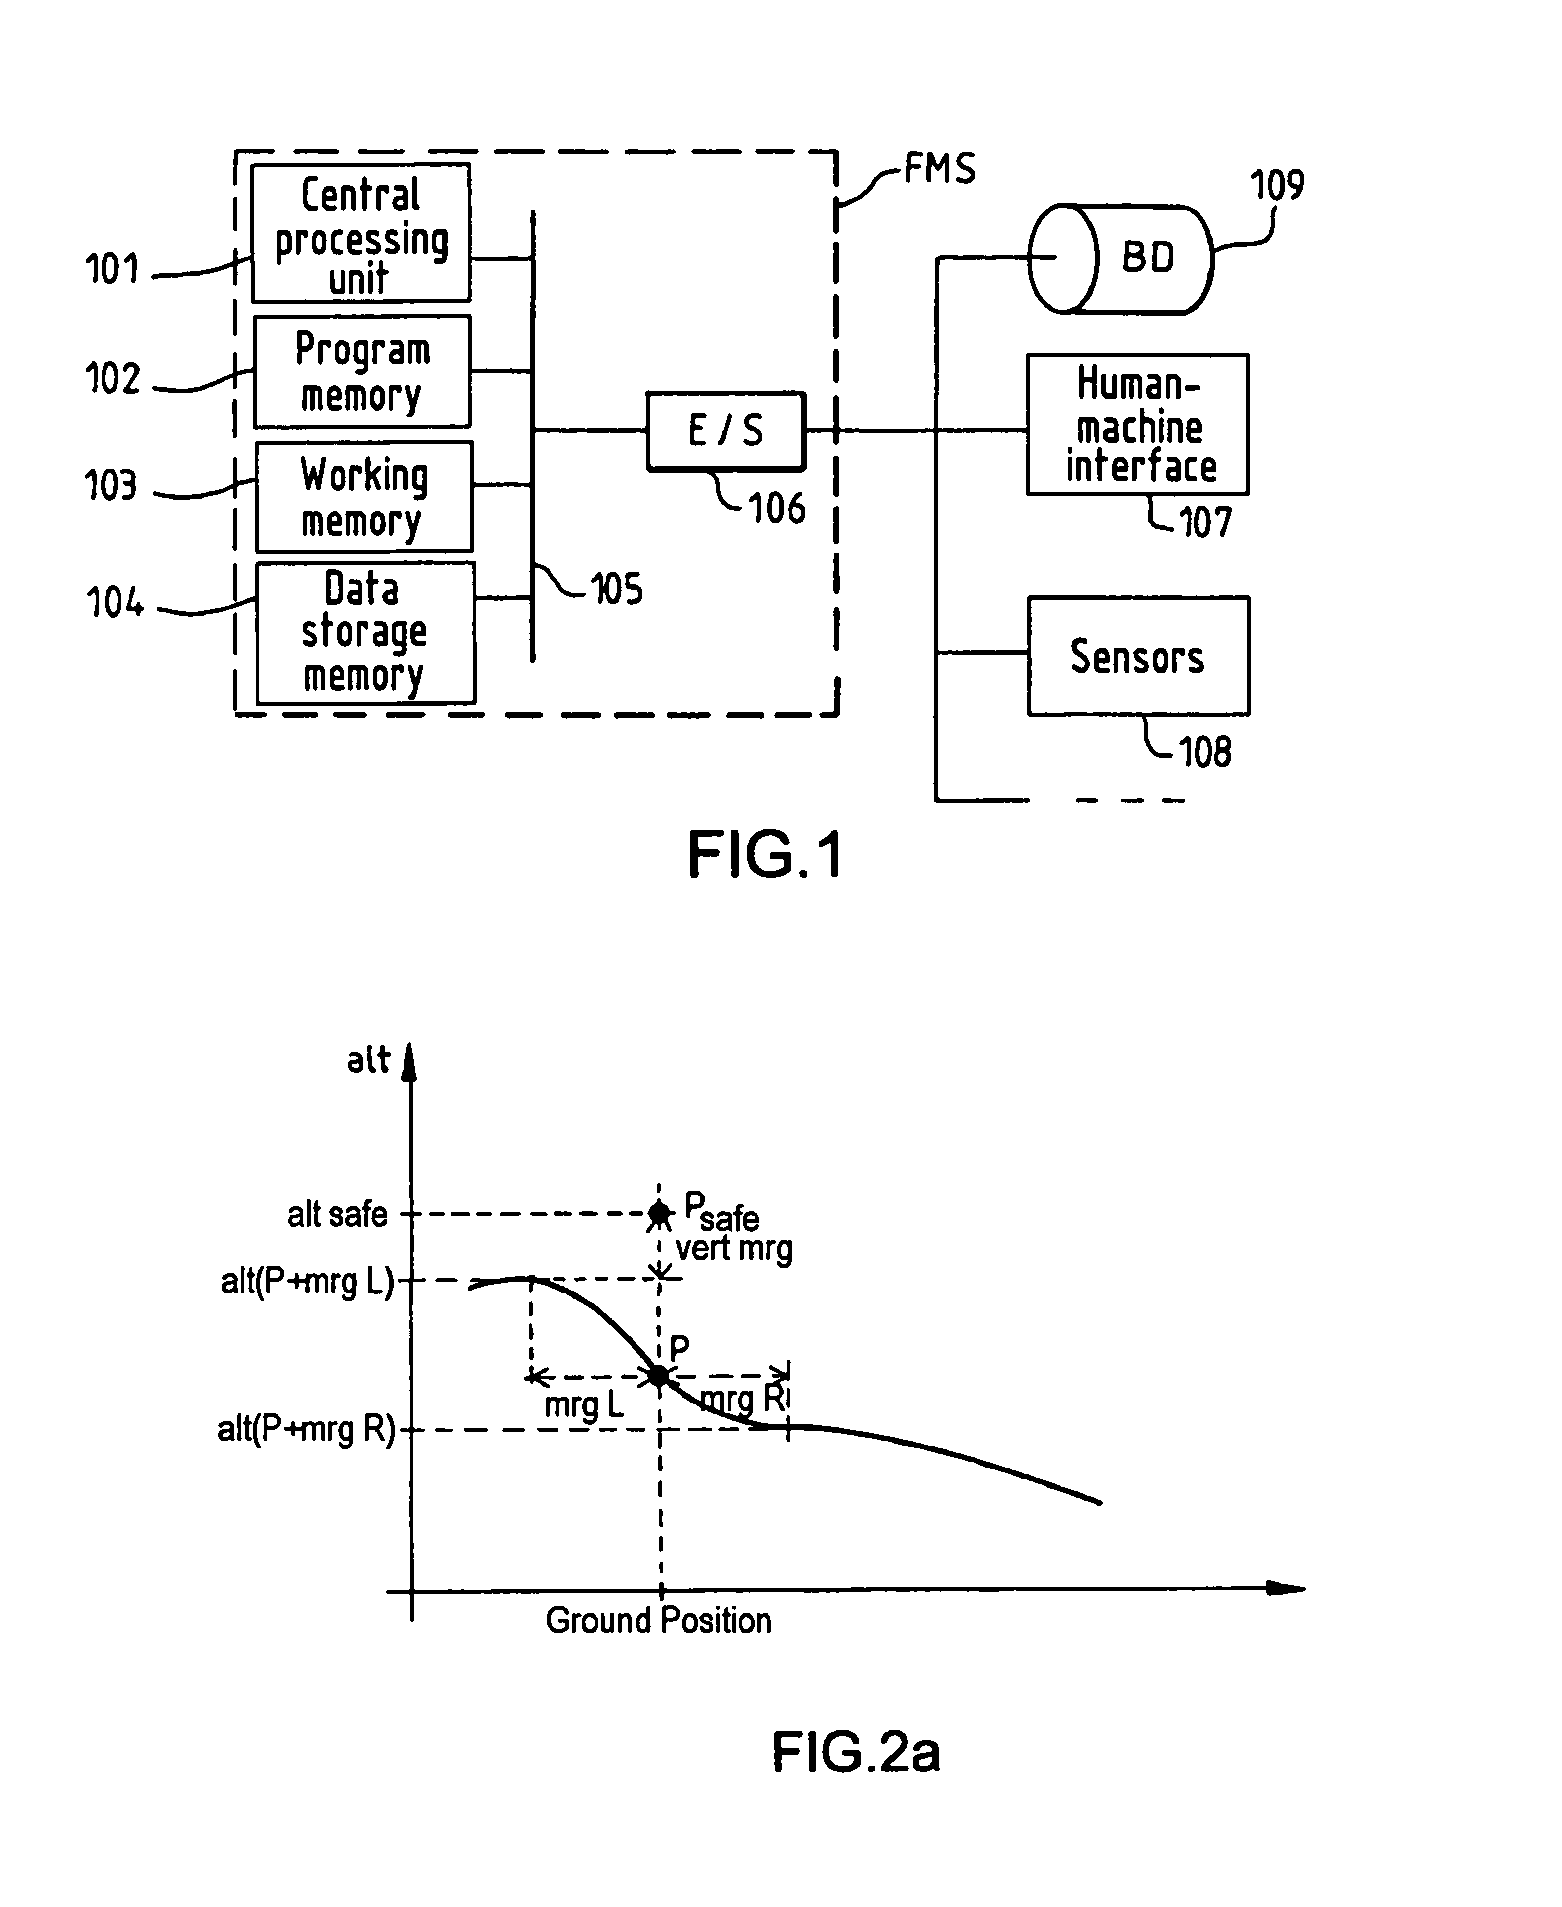 Method for assisting low altitude navigation of an aircraft